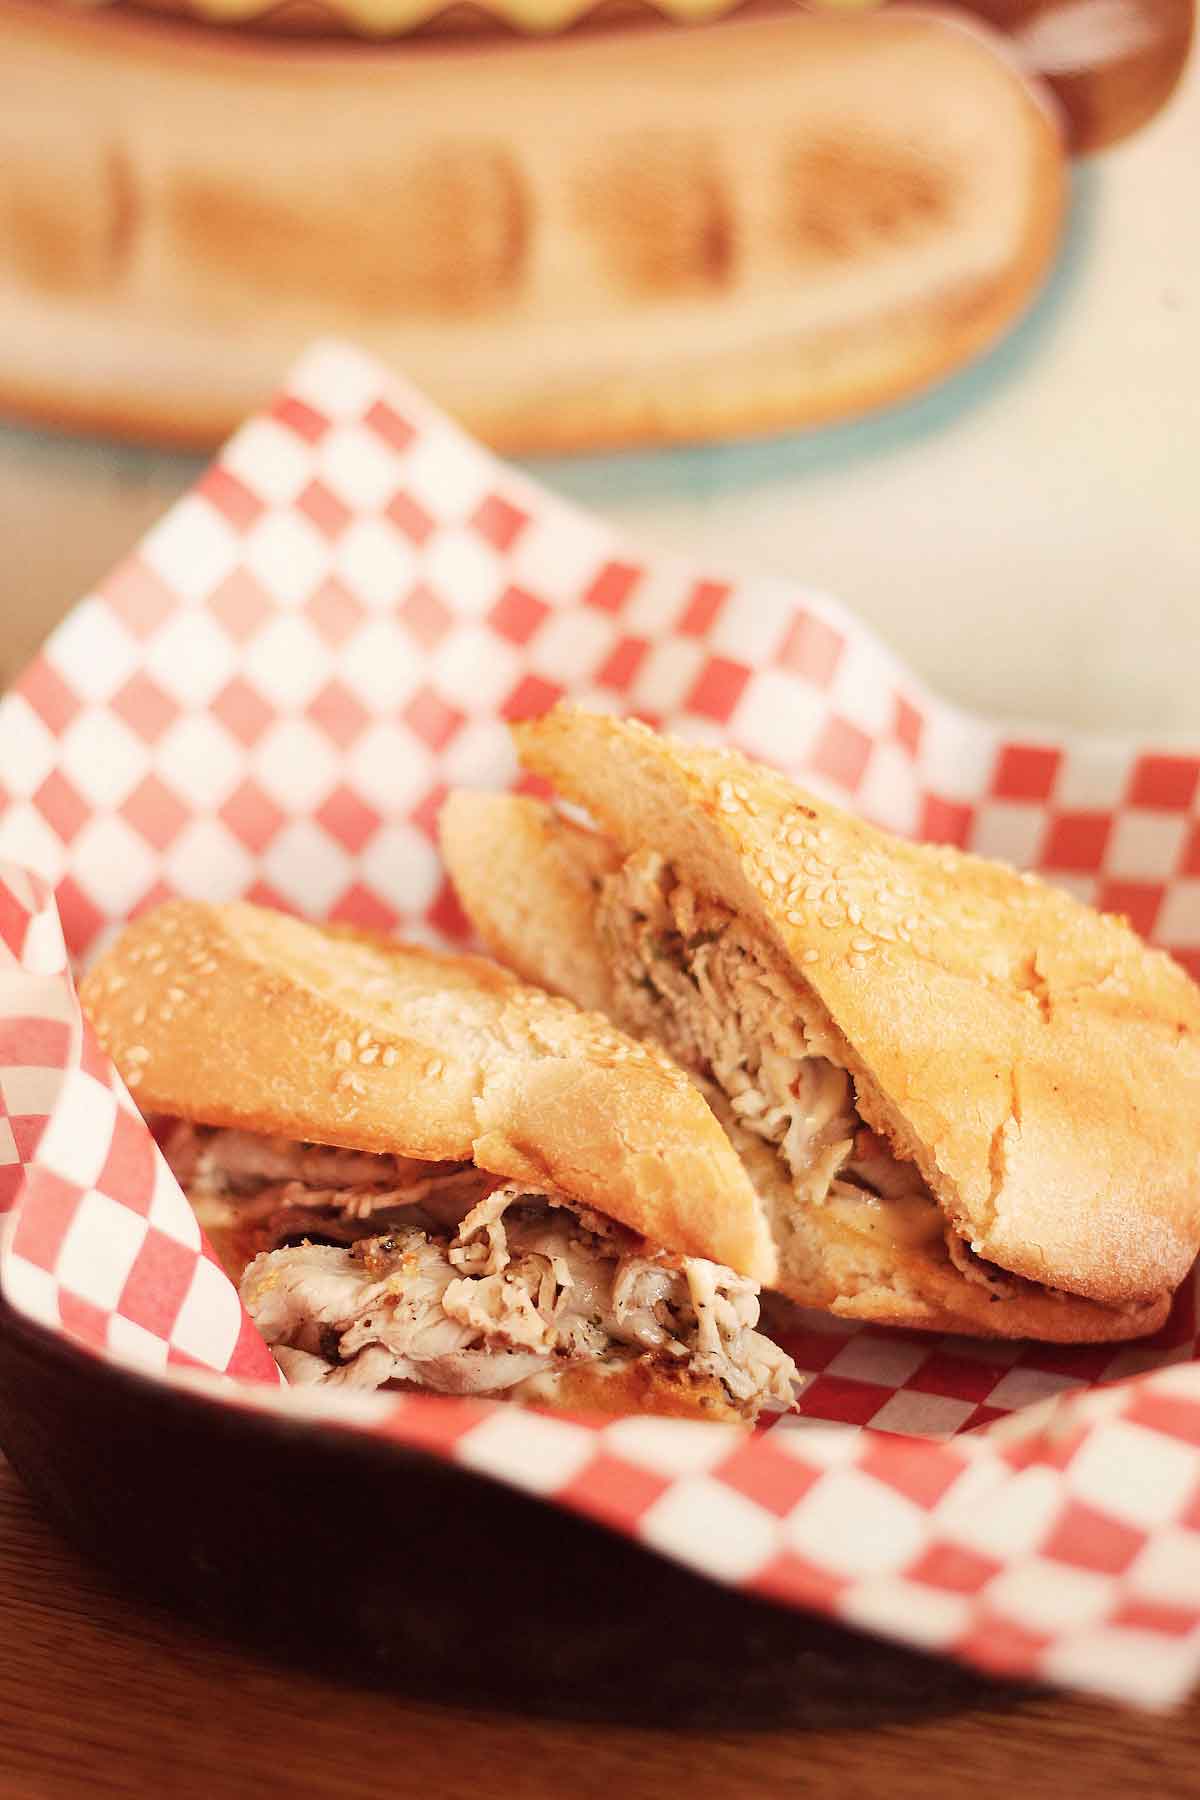 Pork sandwiches served on red and white checkered paper